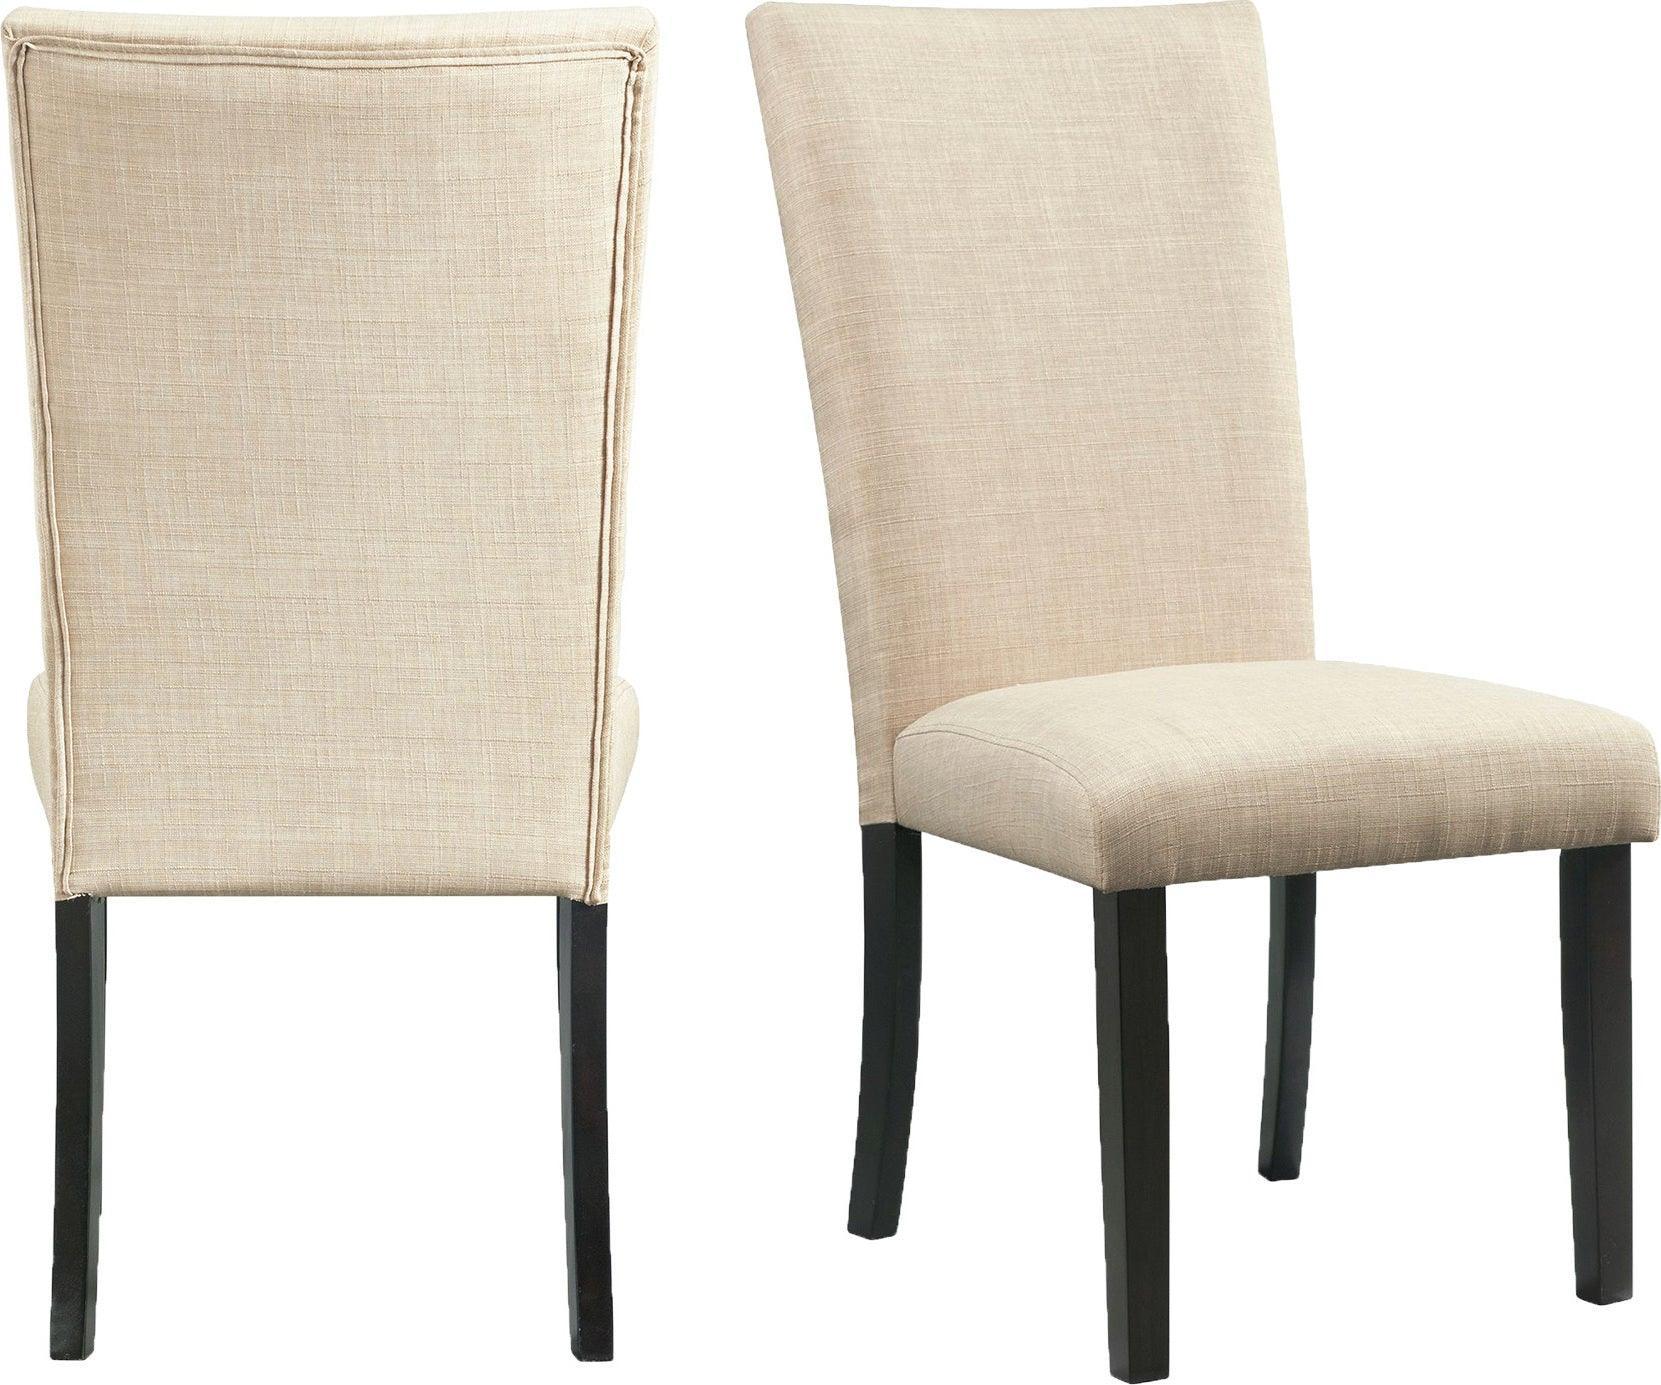 Elements Dining Chairs - Florentina Side Chair Set (Set of 2)